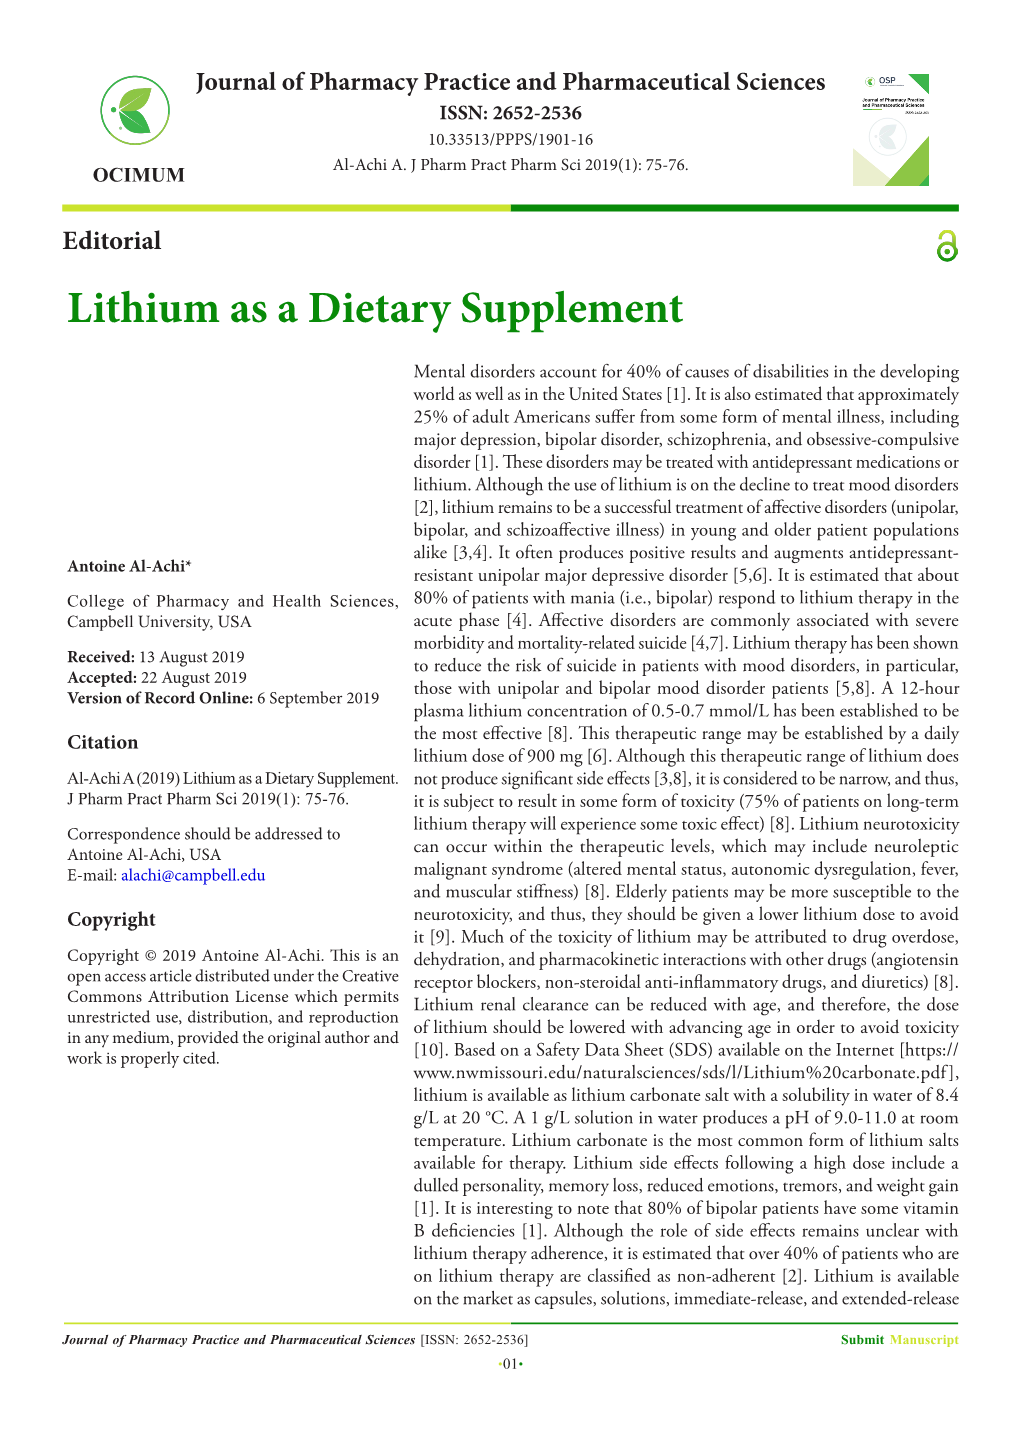 Lithium As a Dietary Supplement